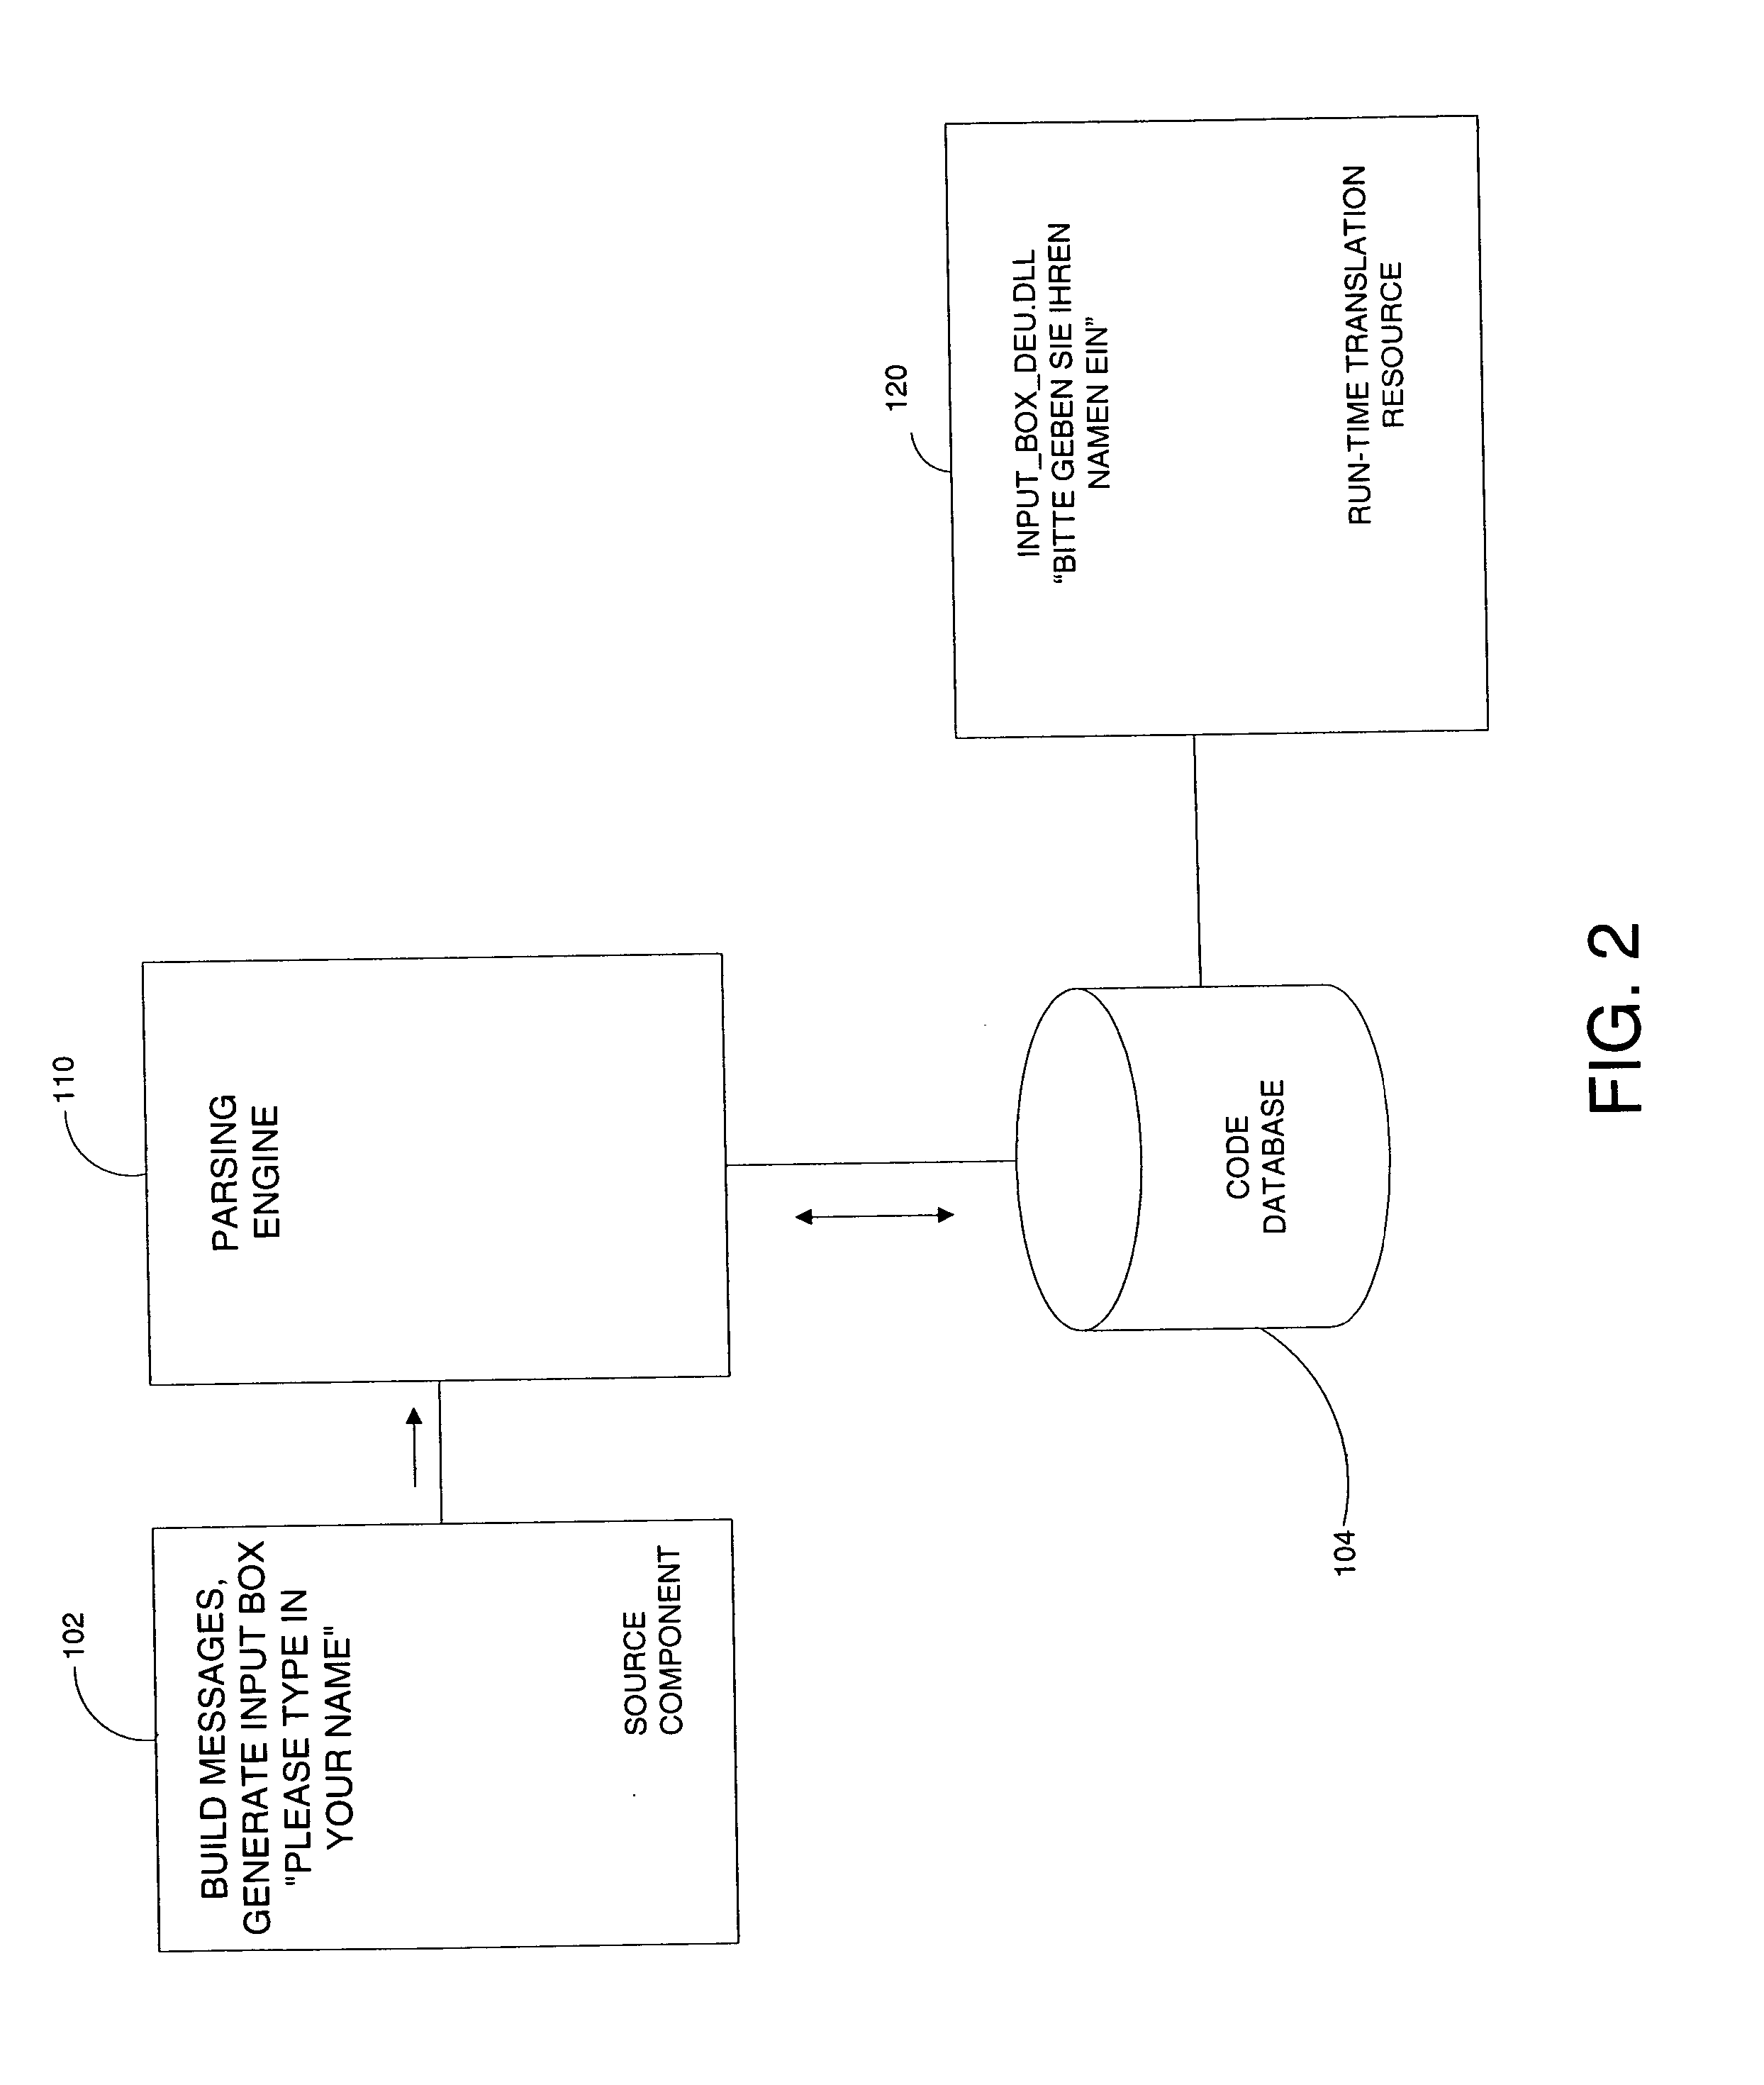 System and method for real-time generation of software translation